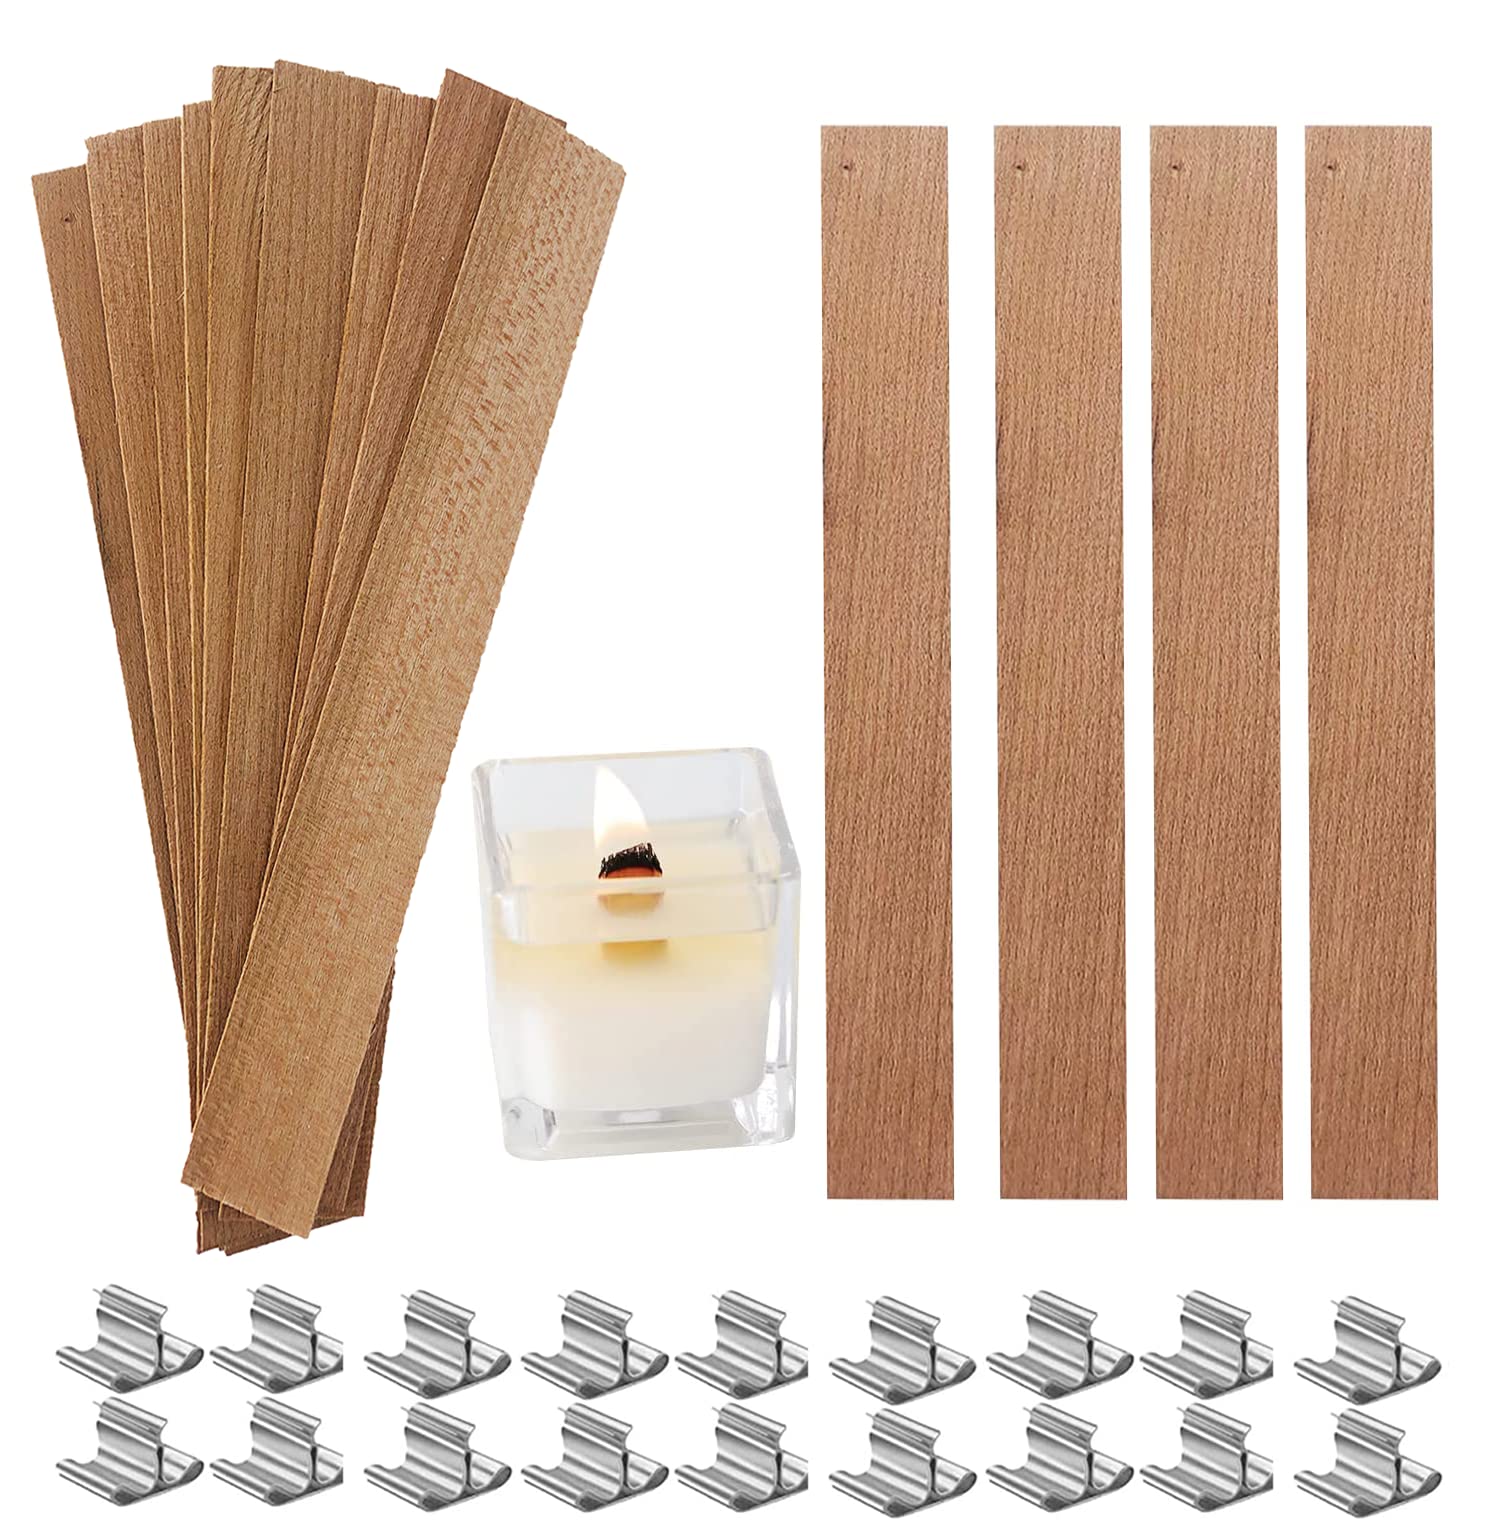 CozYours Wooden Candle Wick Holders (150 Pack)